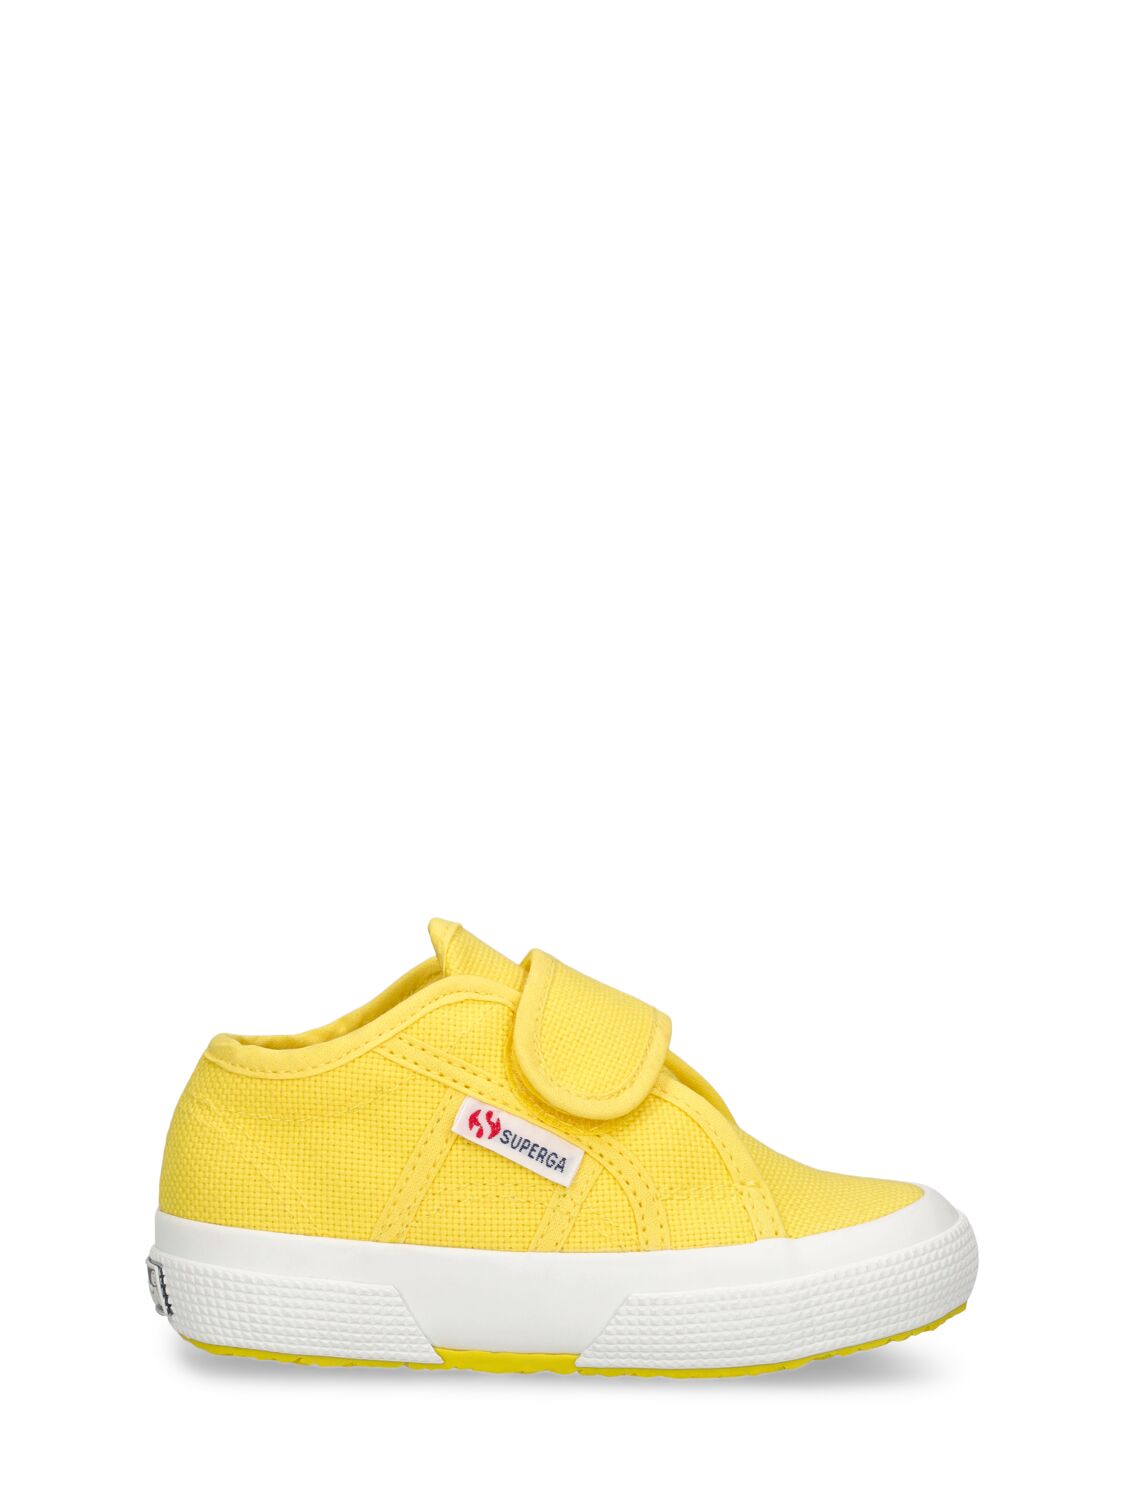 Superga Kids' 2750-bstrap Cotton Canvas Trainers In Yellow